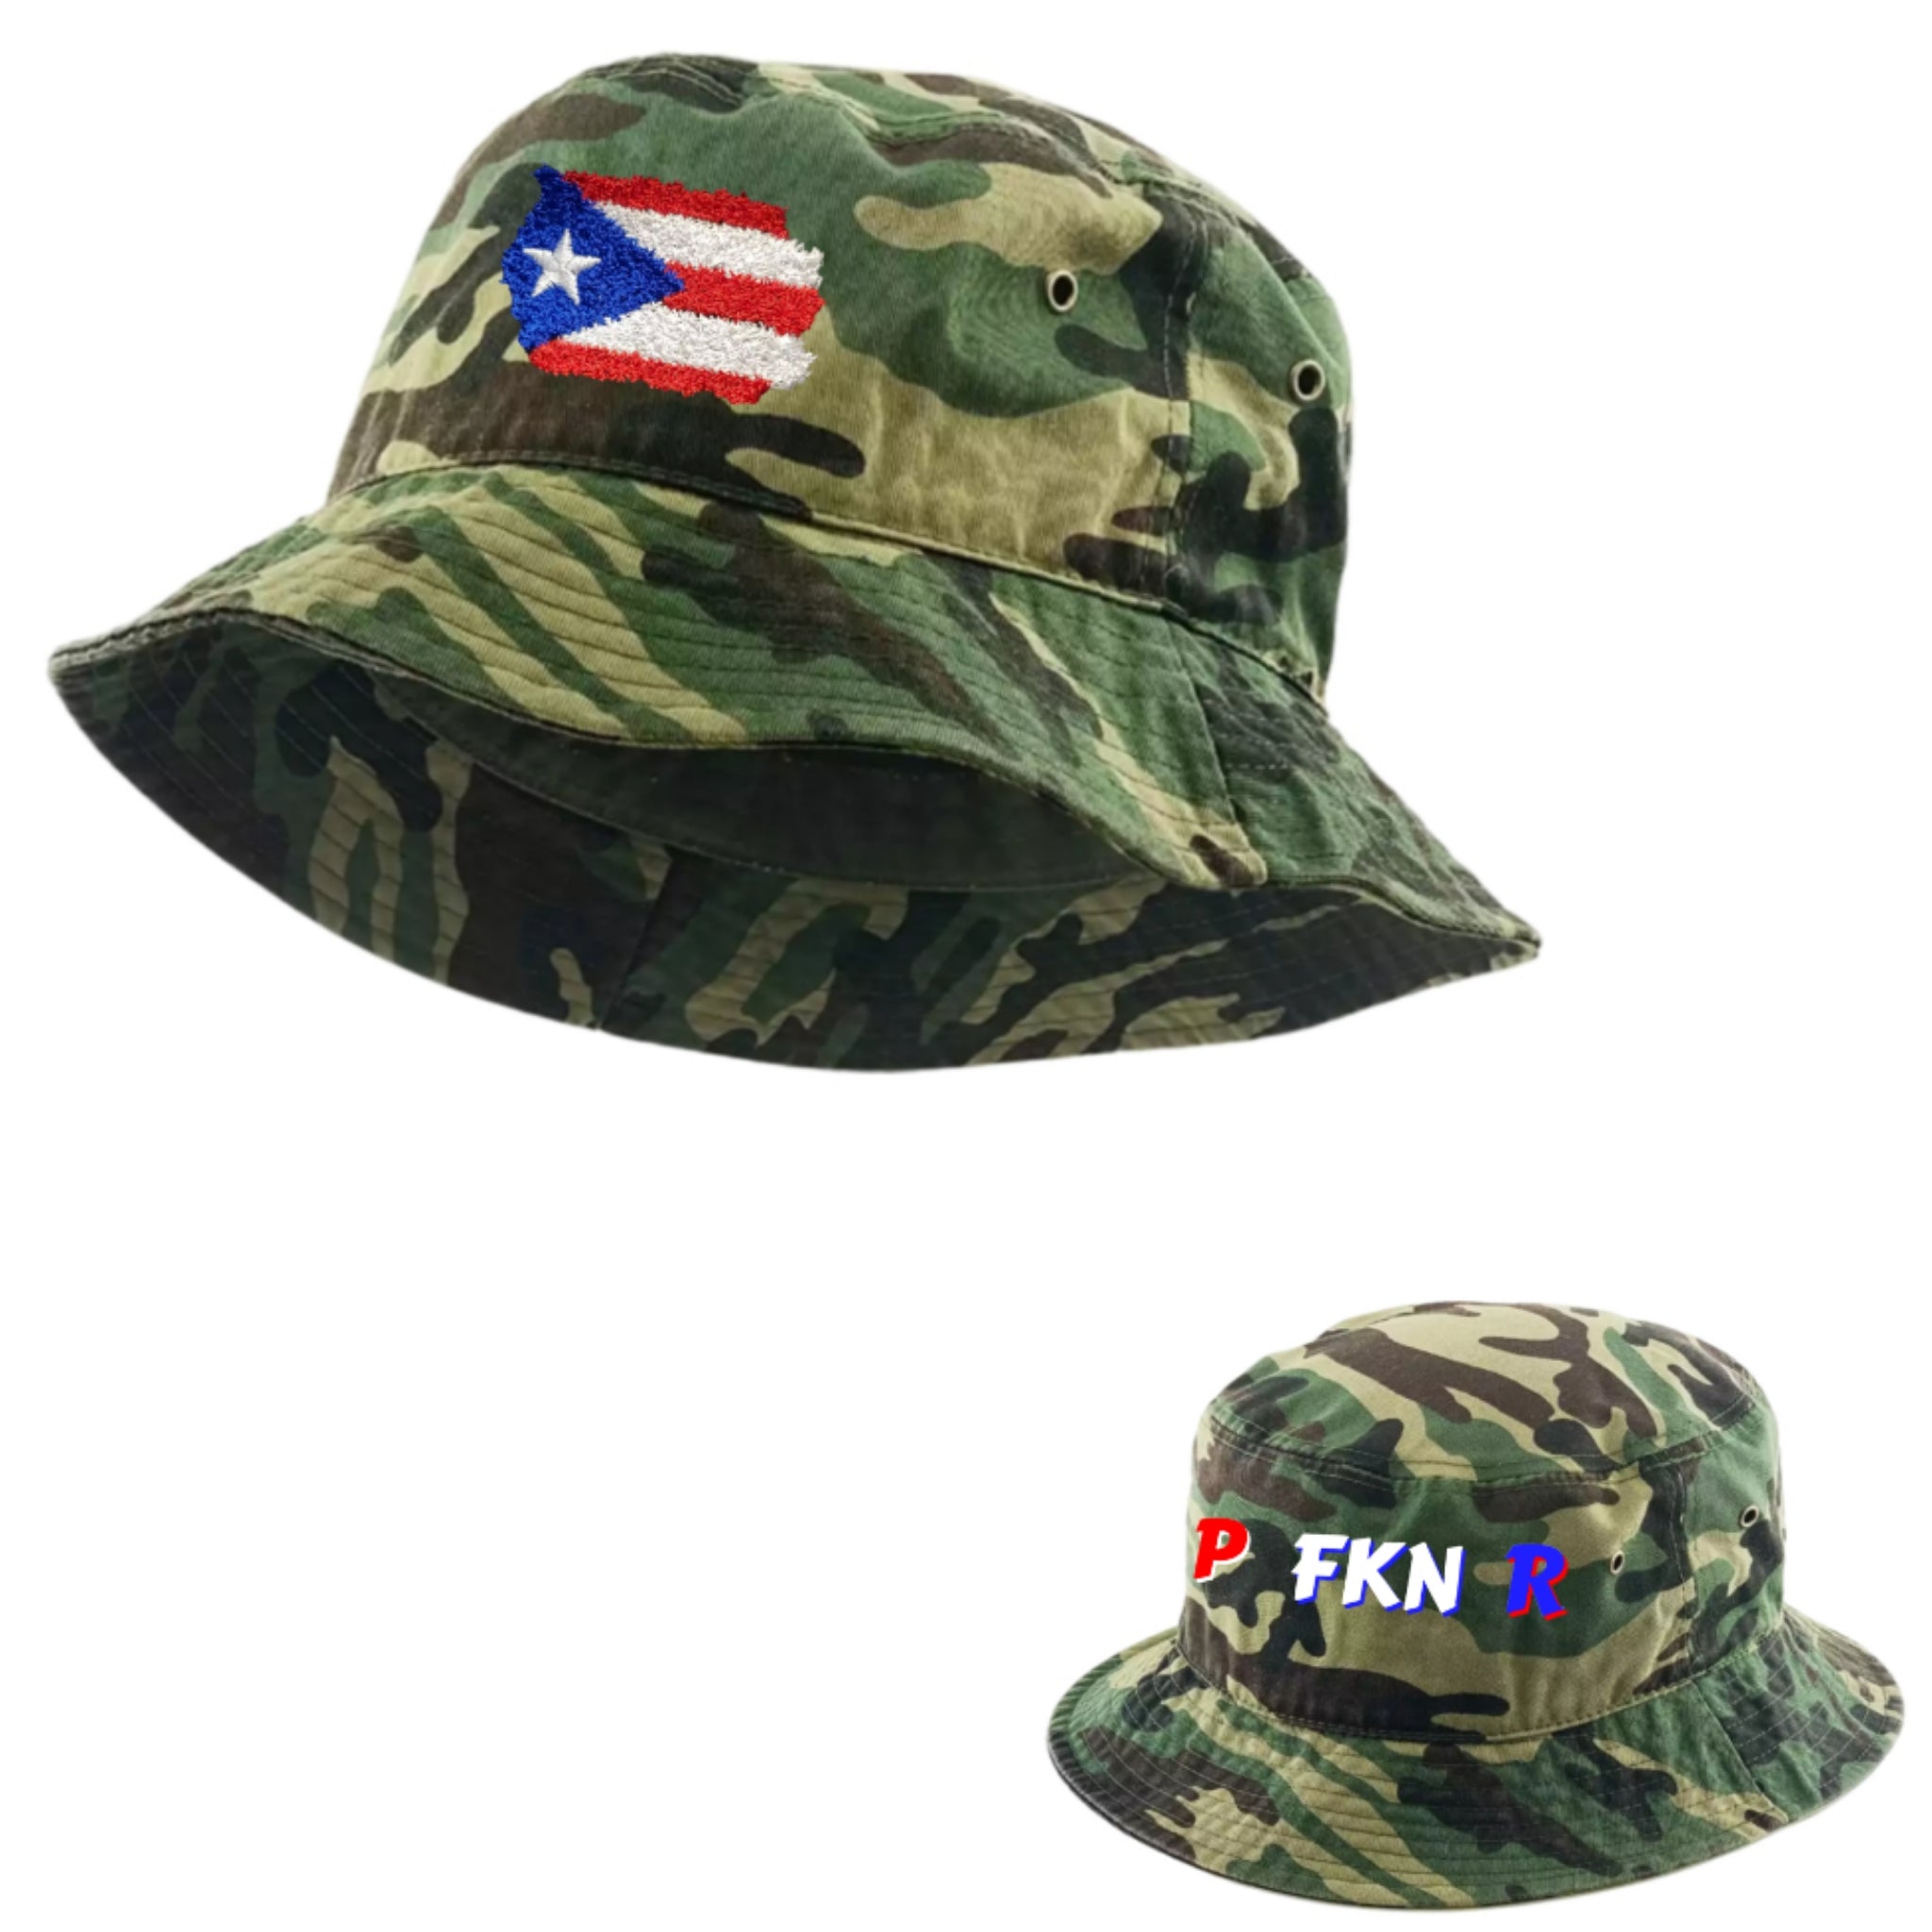 P FKN R Bucket Hats (More colors available)